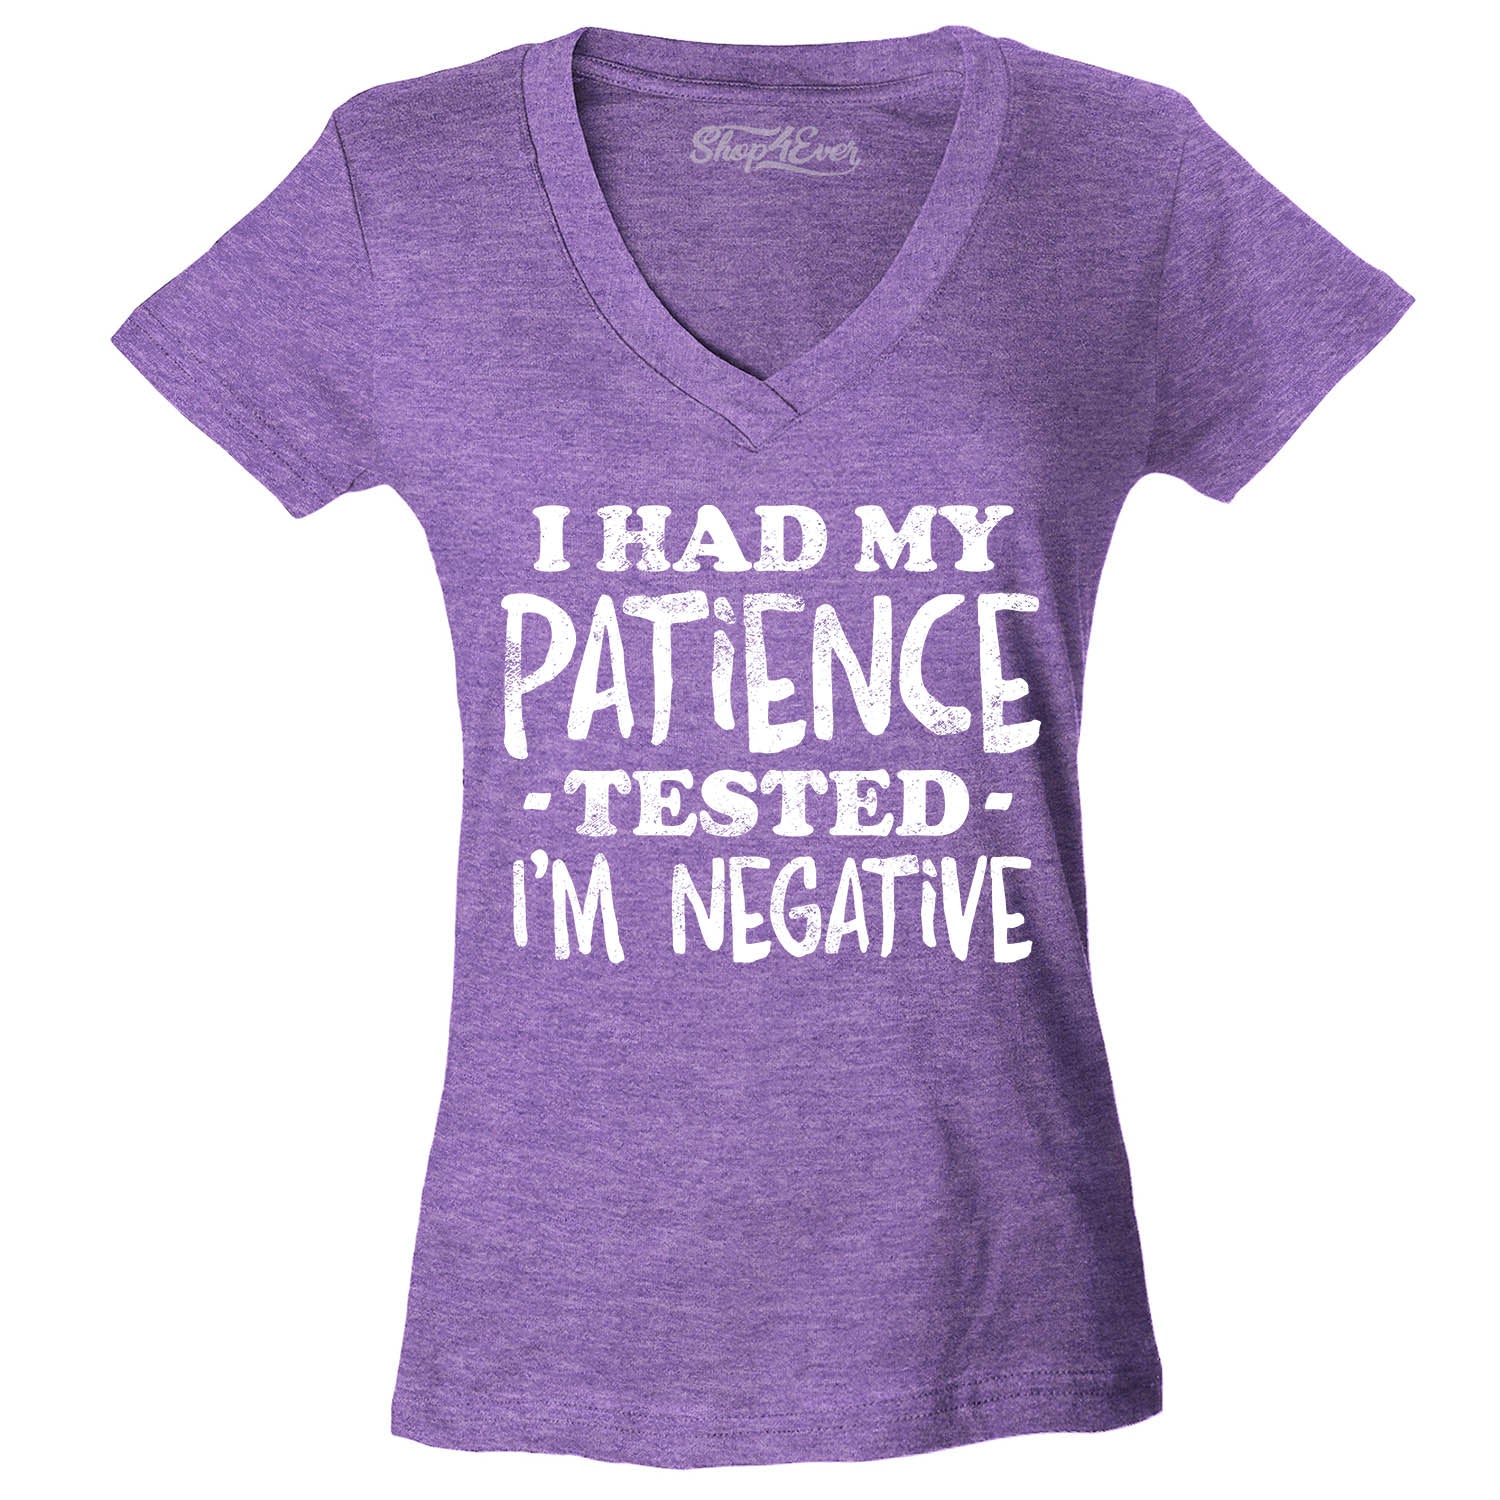 I Had My Patience Tested I'm Negative Women's V-Neck T-Shirt Slim Fit